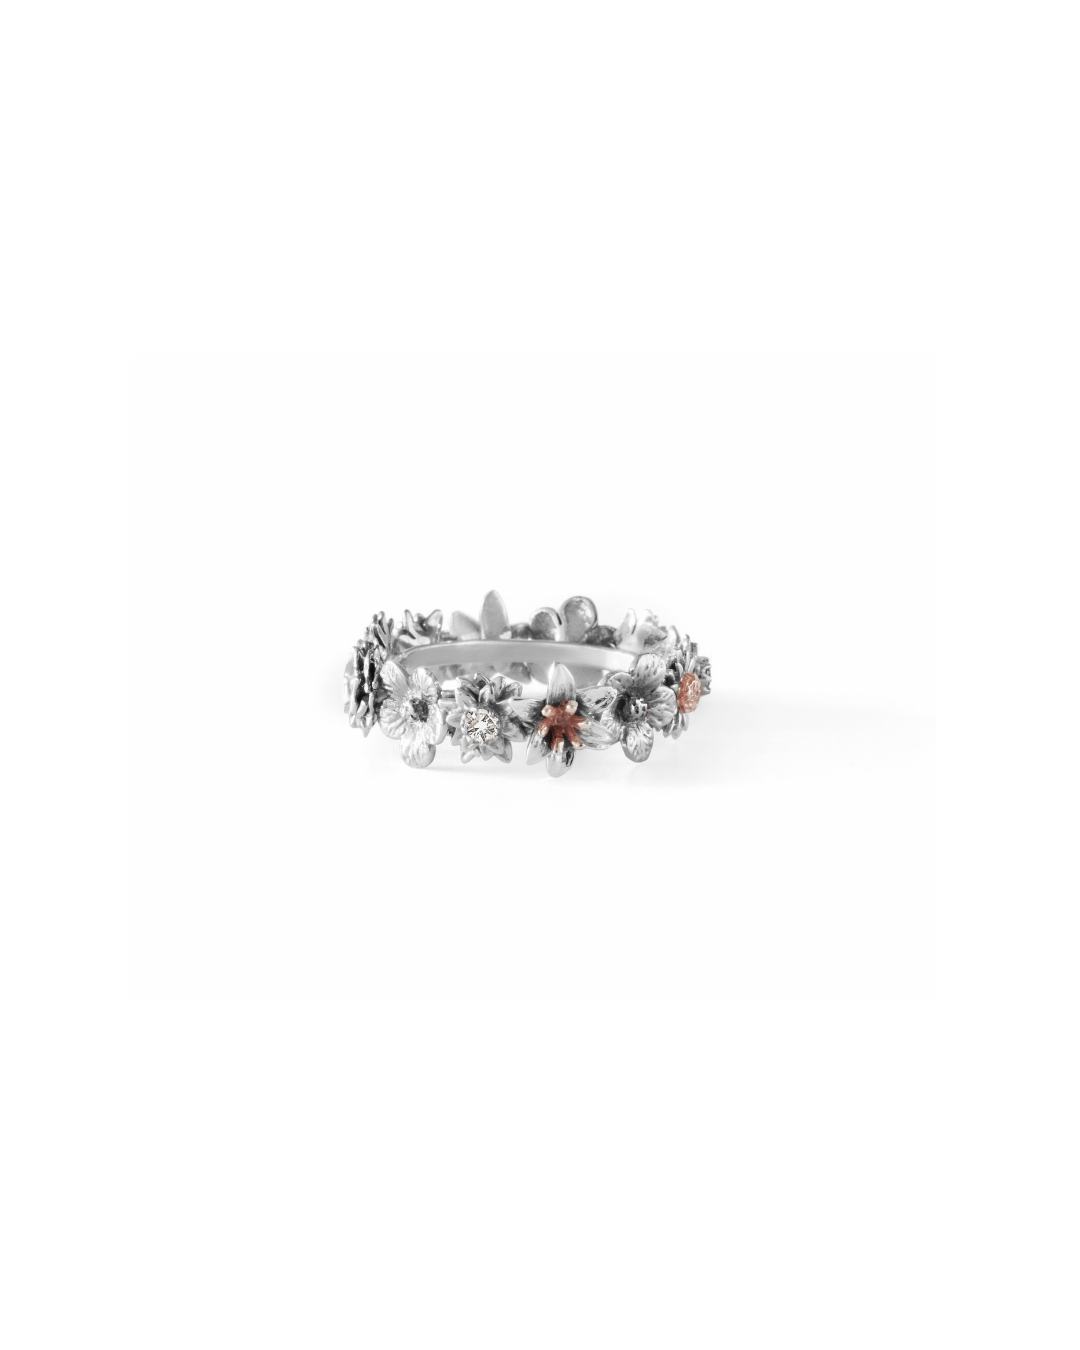 FLORA Second Edition Sterling Silver Ring